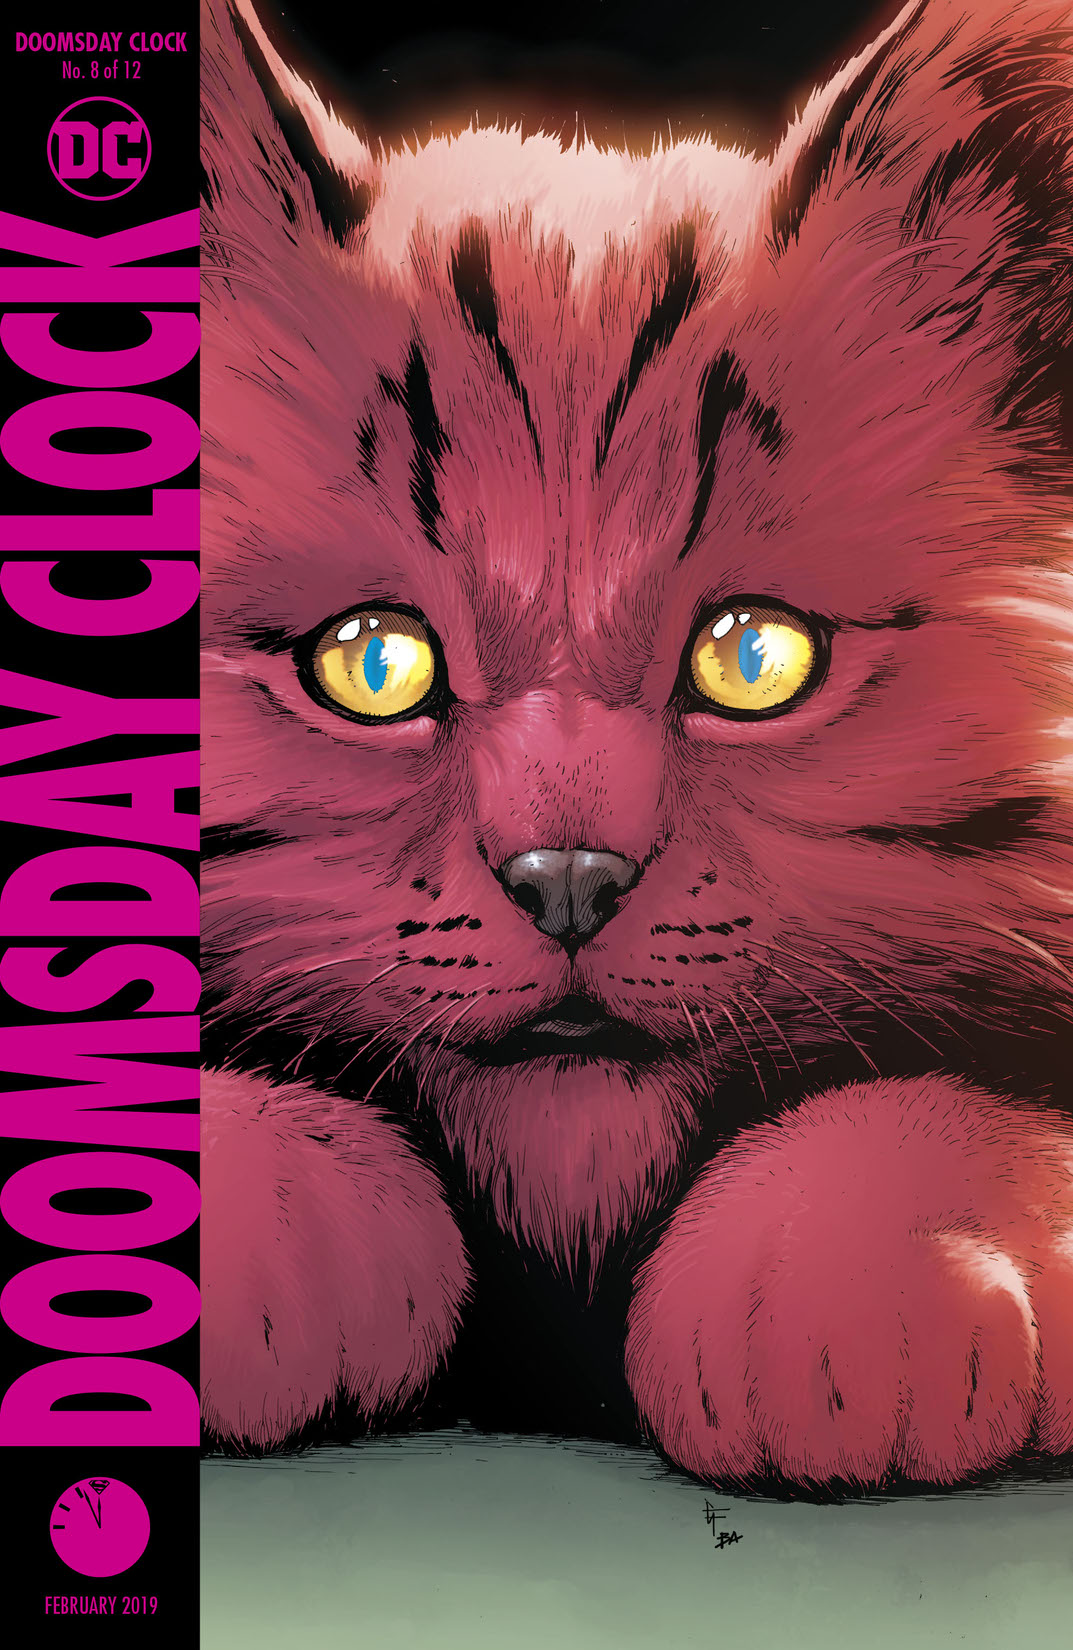 Doomsday Clock #8 preview images